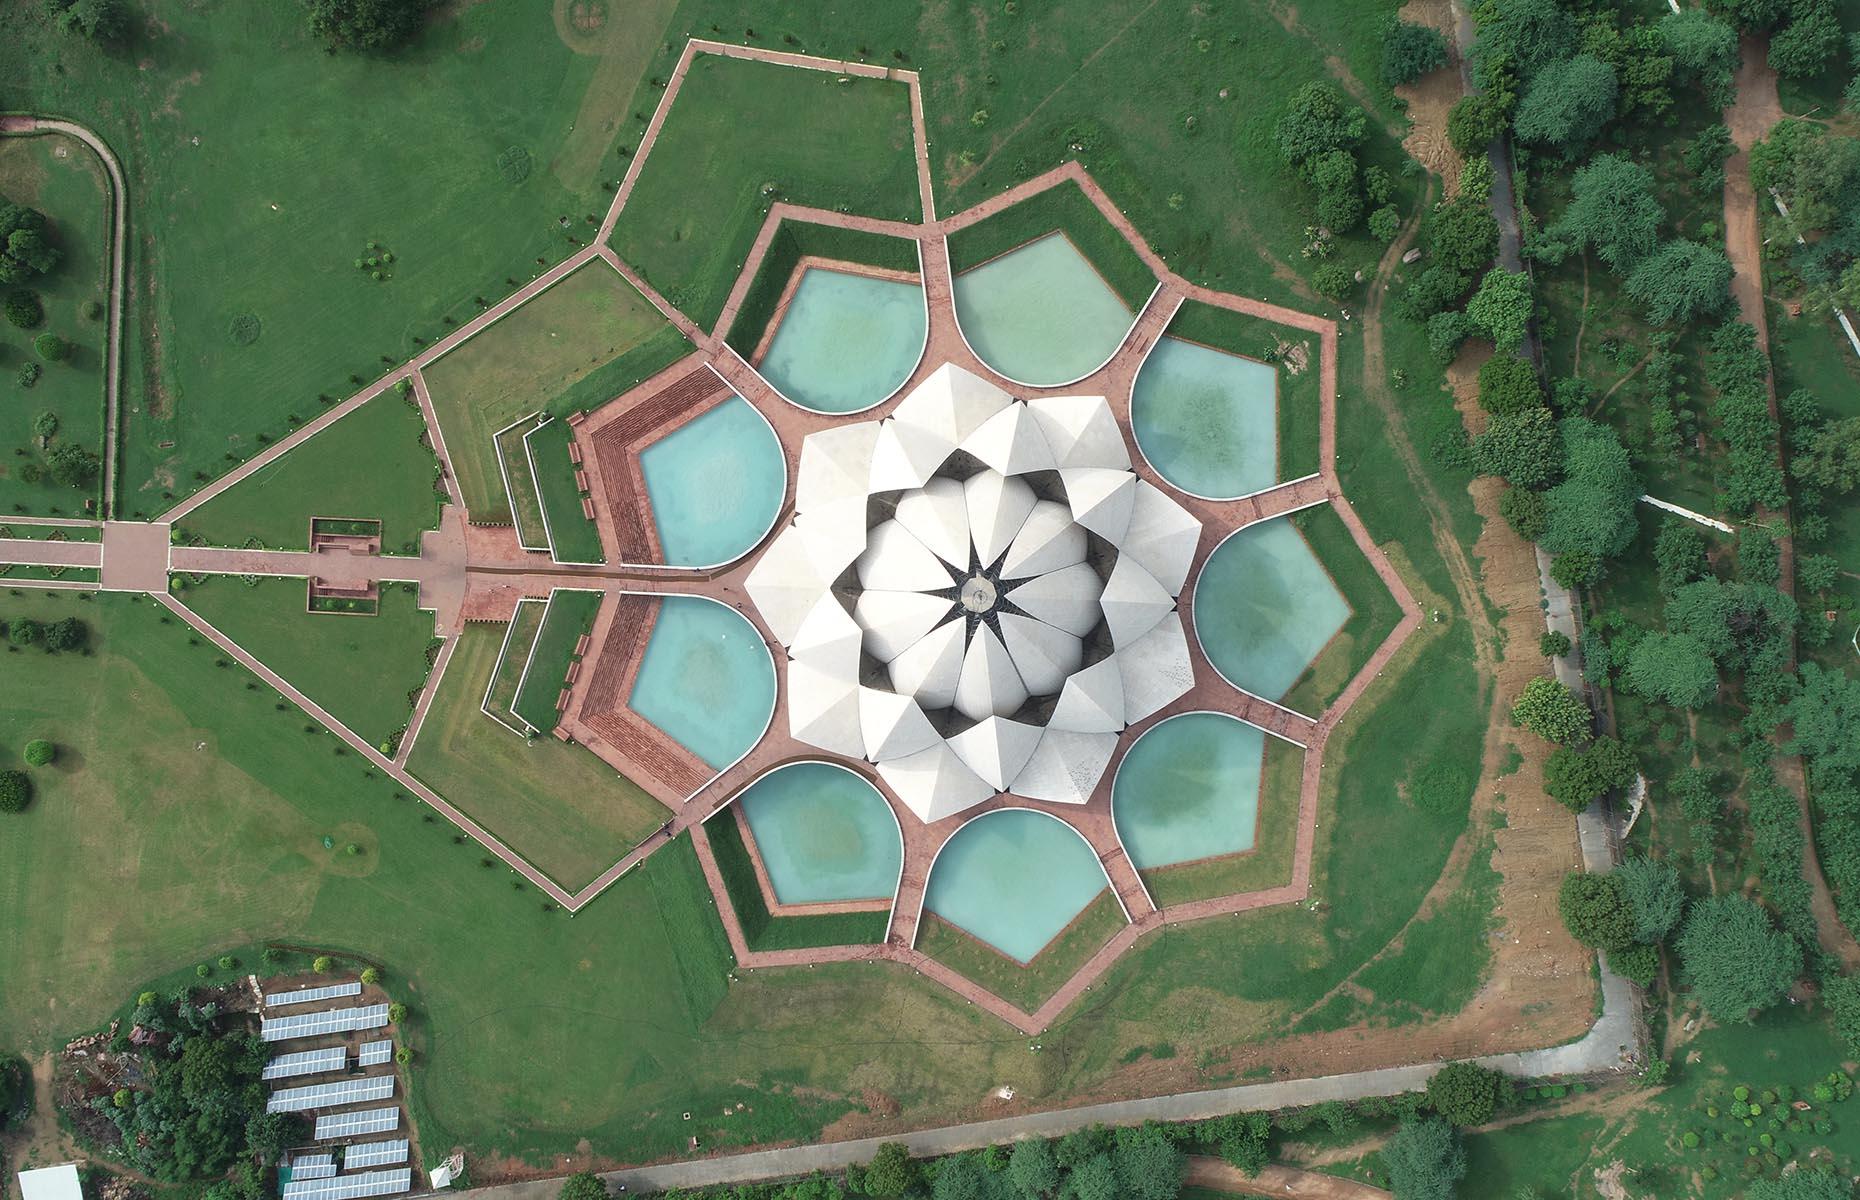 This temple, shaped like a lotus flower, is located in the second most populous country in the world.